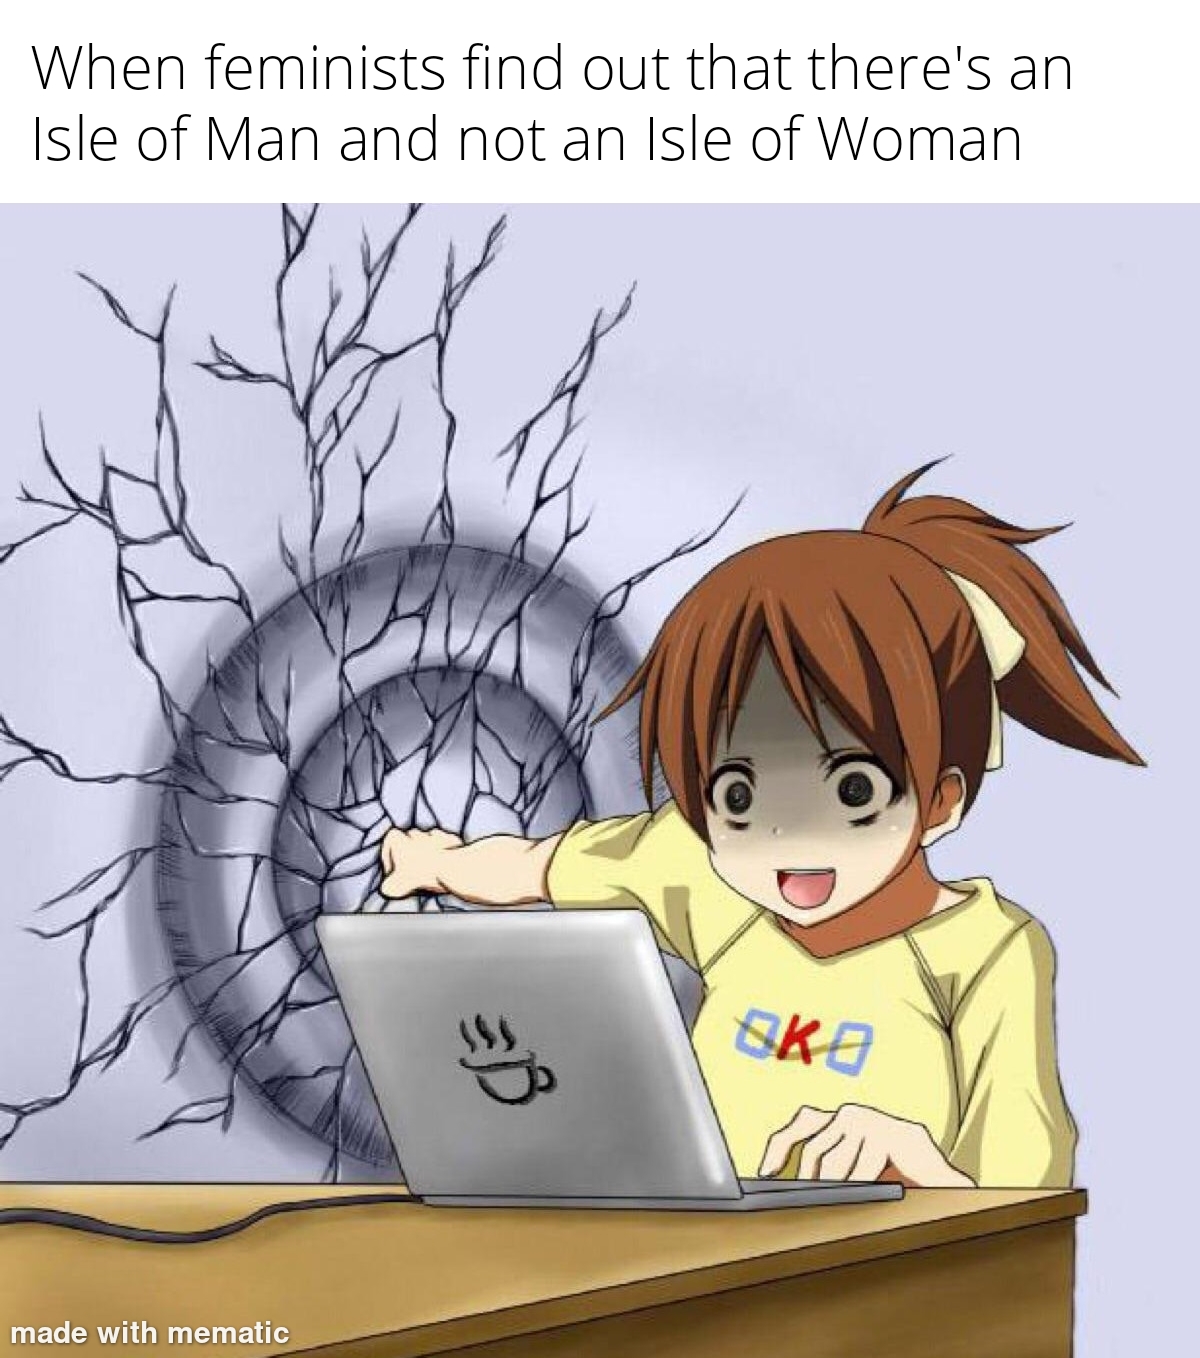 school memes - When feminists find out that there's an Isle of Man and not an Isle of Woman ska made with mematic